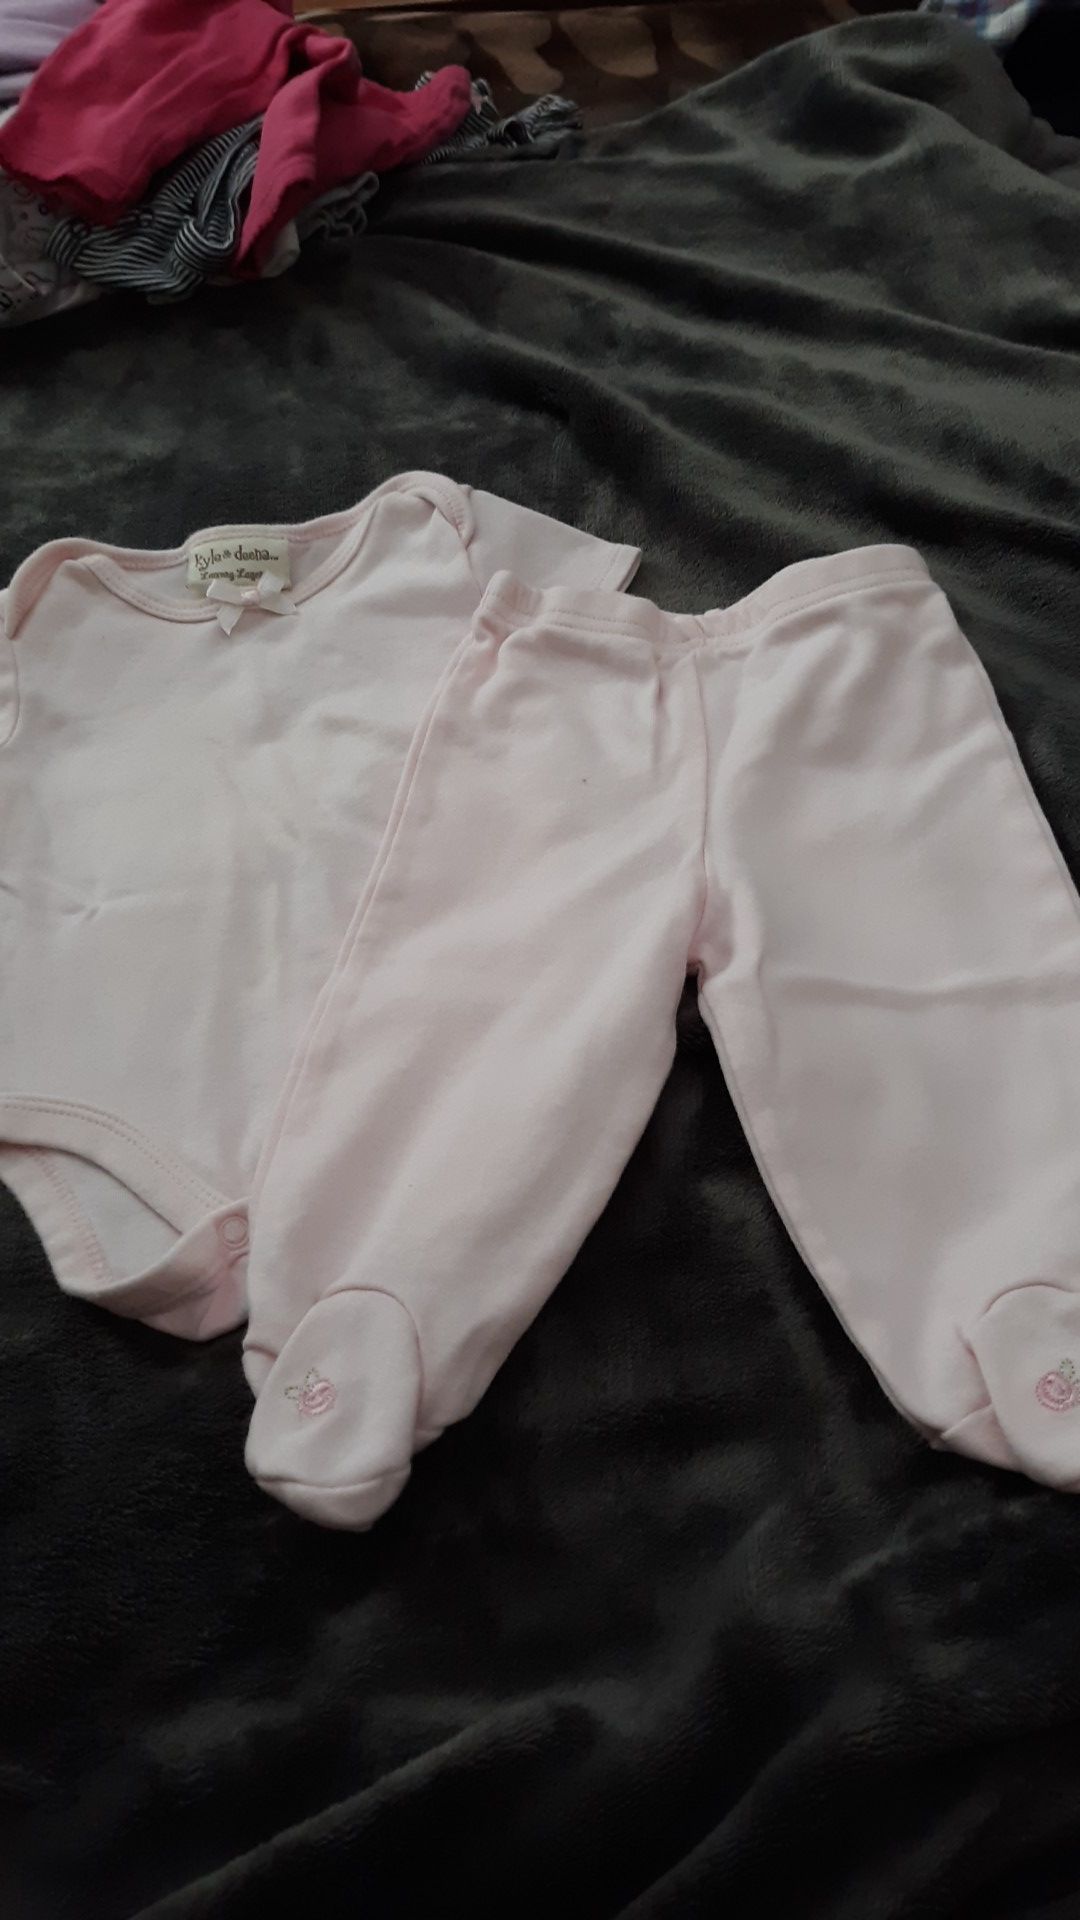 Soft pink Baby Top and bottoms. Newborn to 3 mos